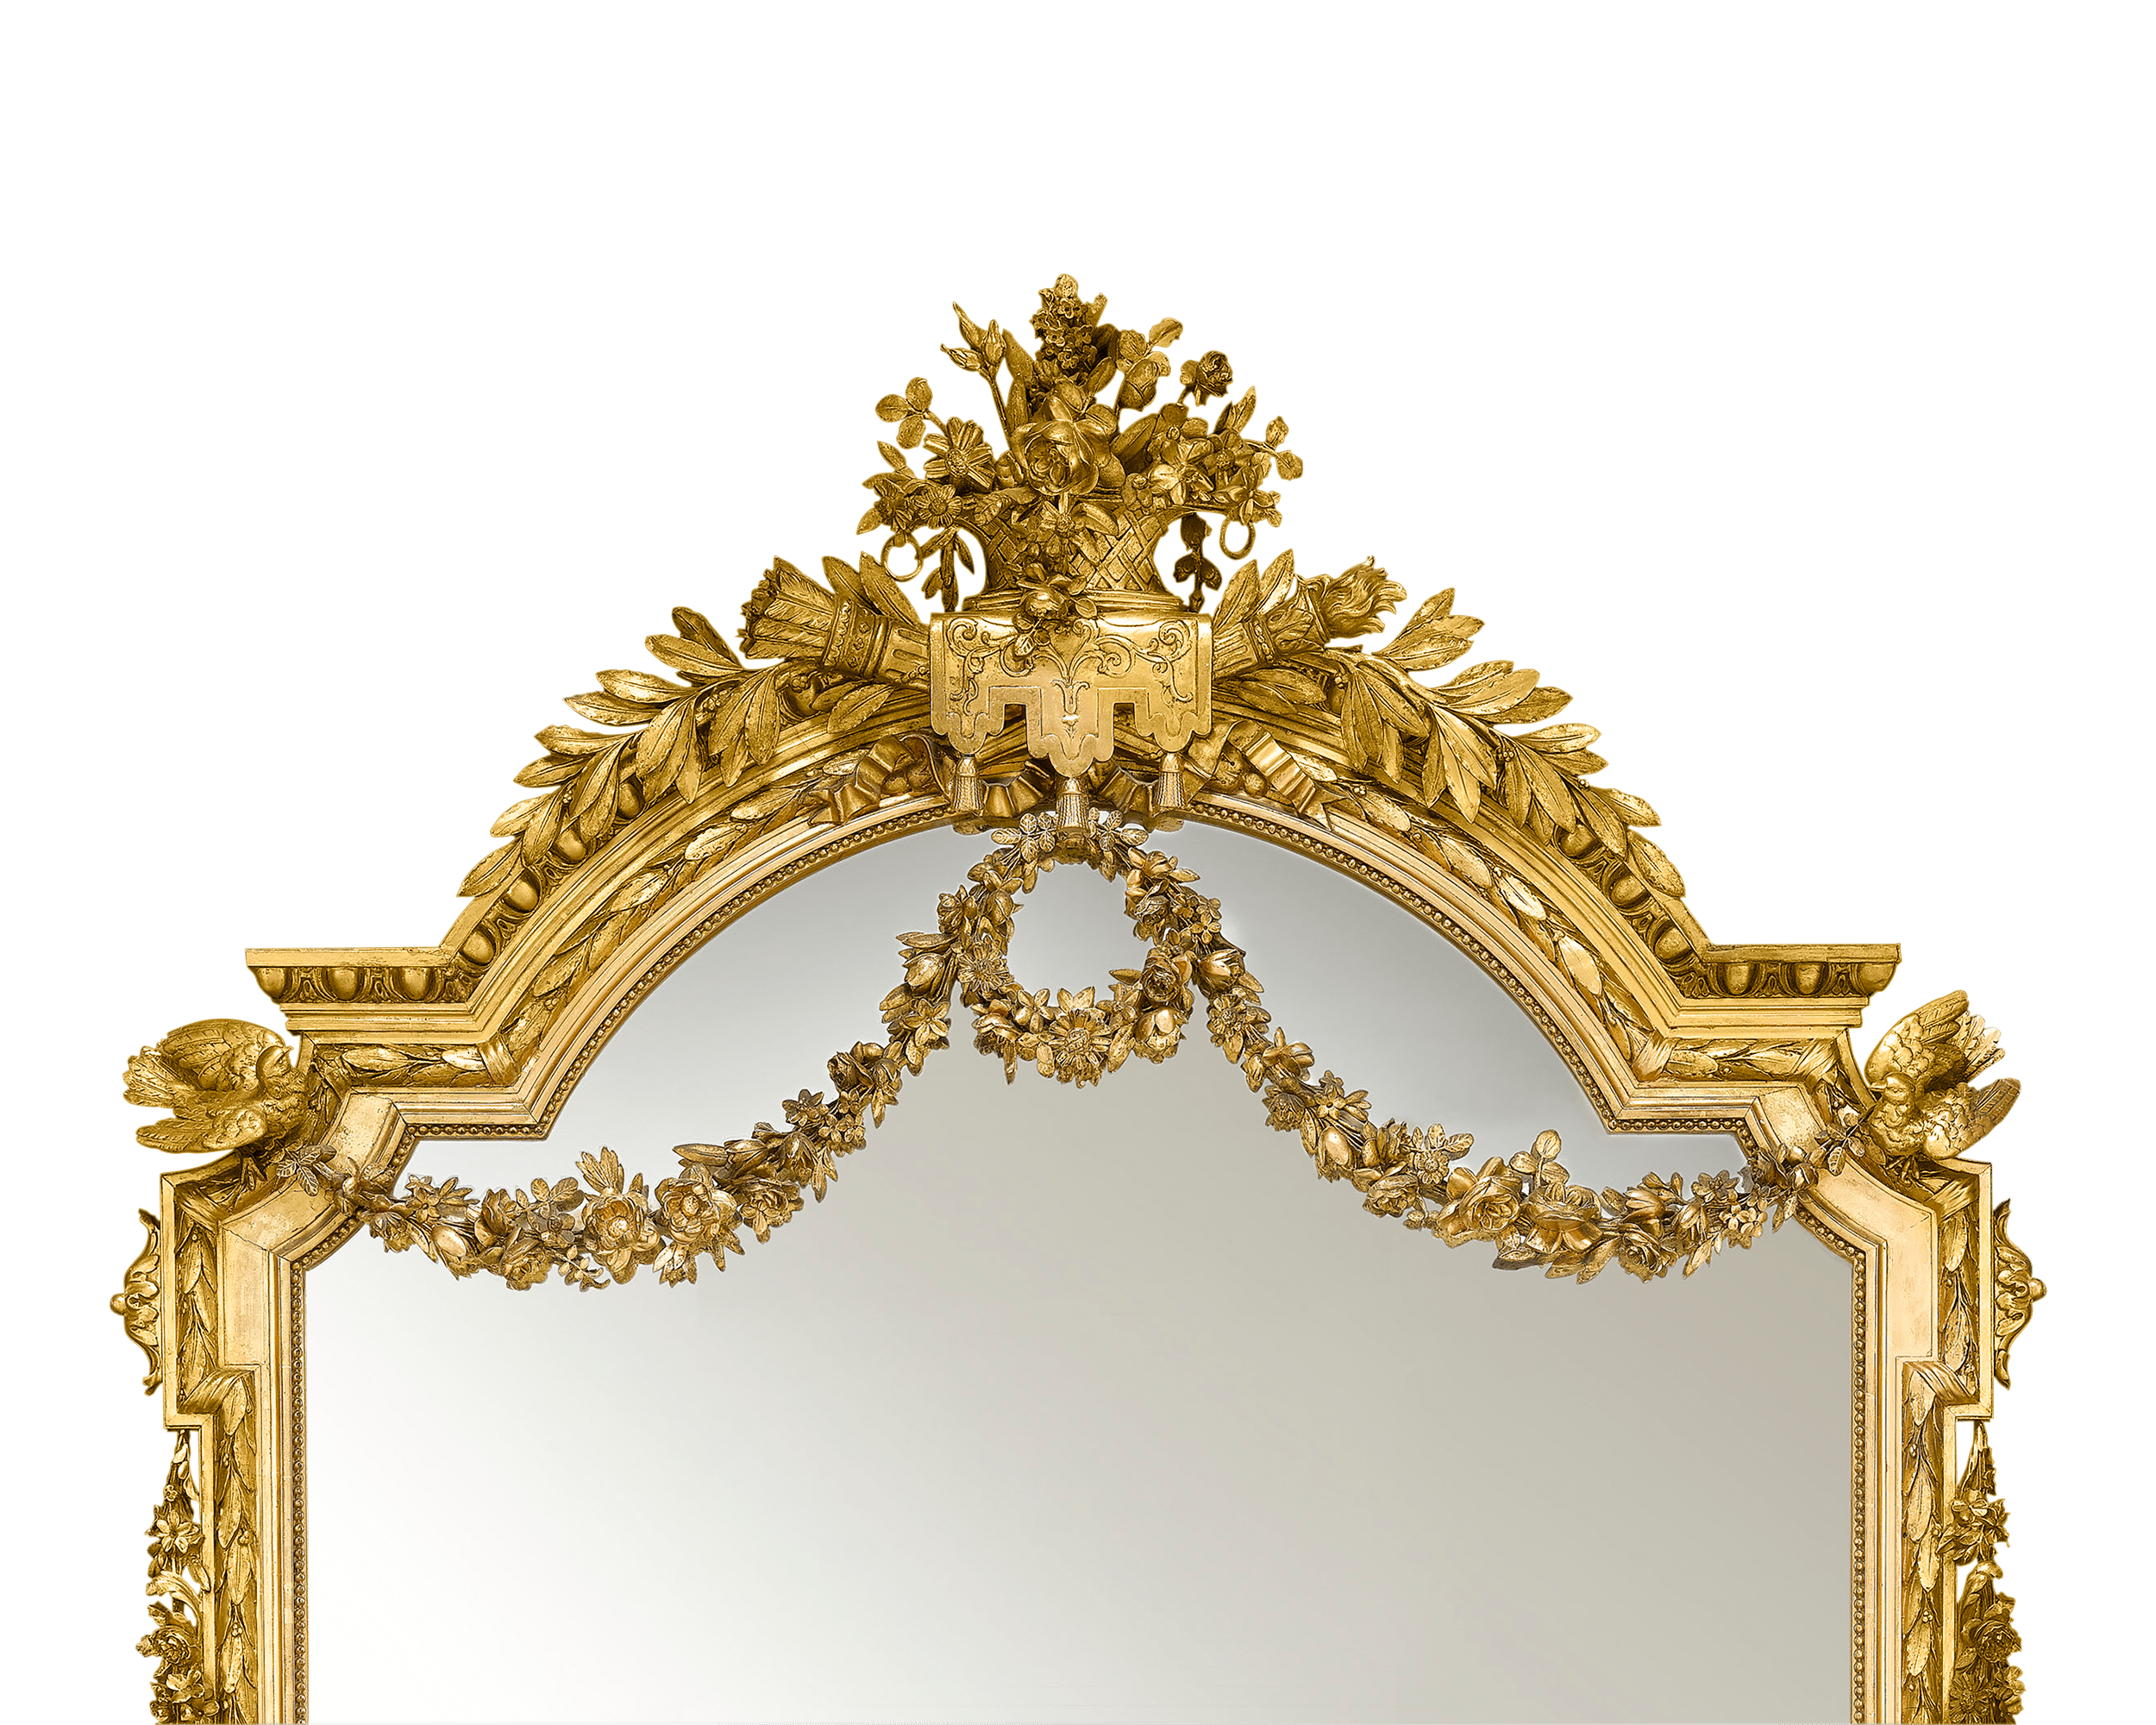 The carved giltwood frame features garlands, doves, flowers and Apollo's torch